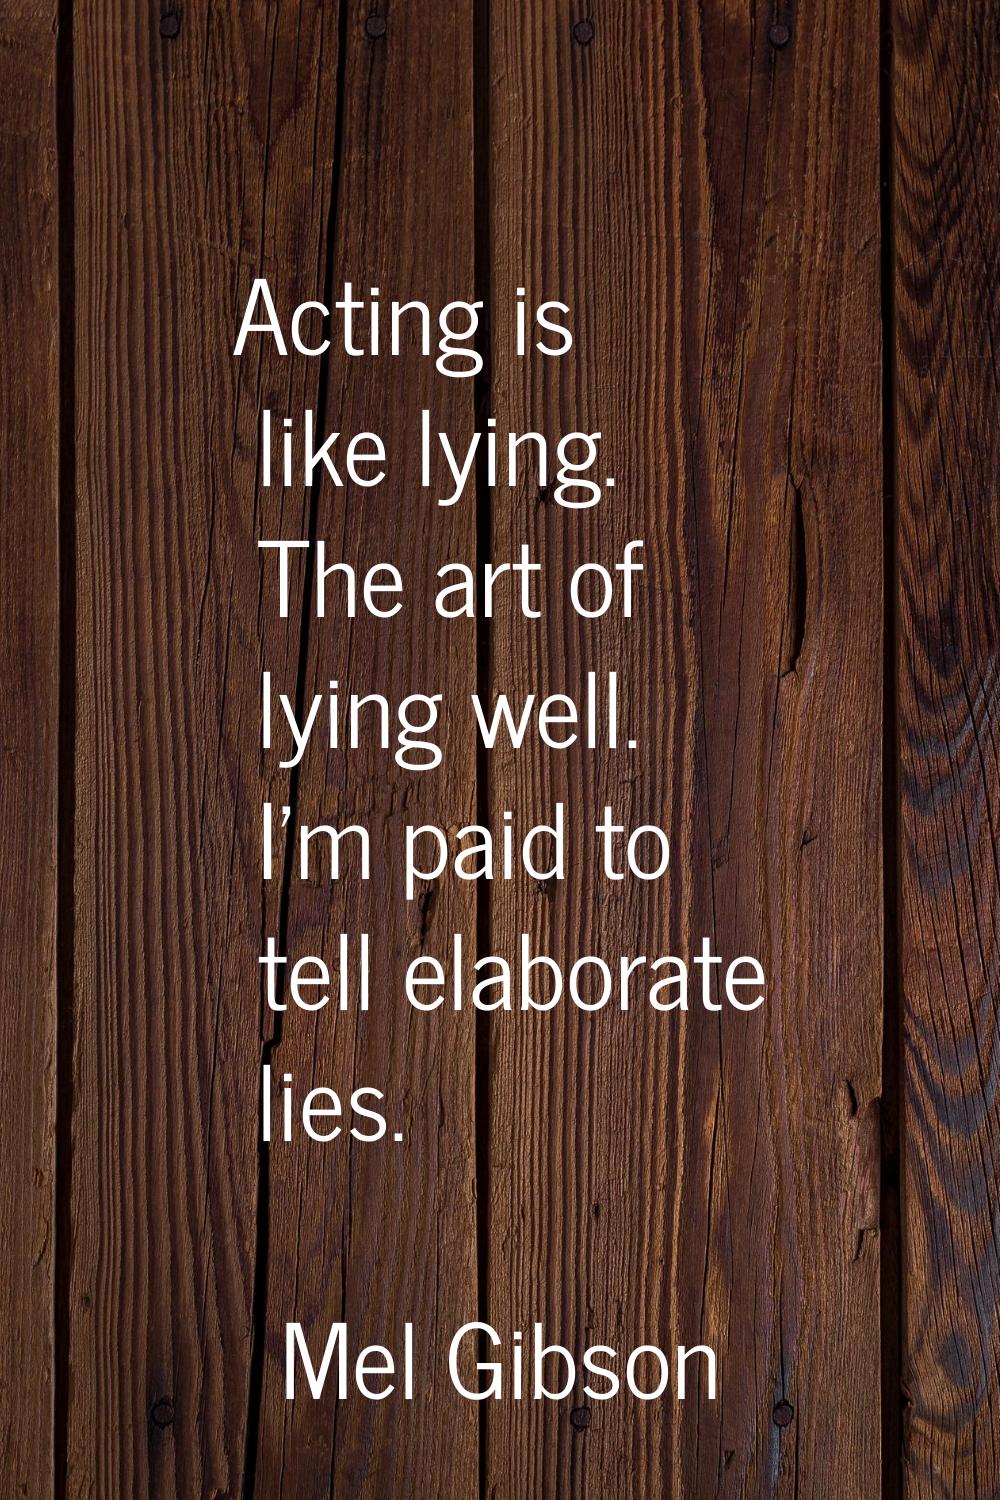 Acting is like lying. The art of lying well. I'm paid to tell elaborate lies.